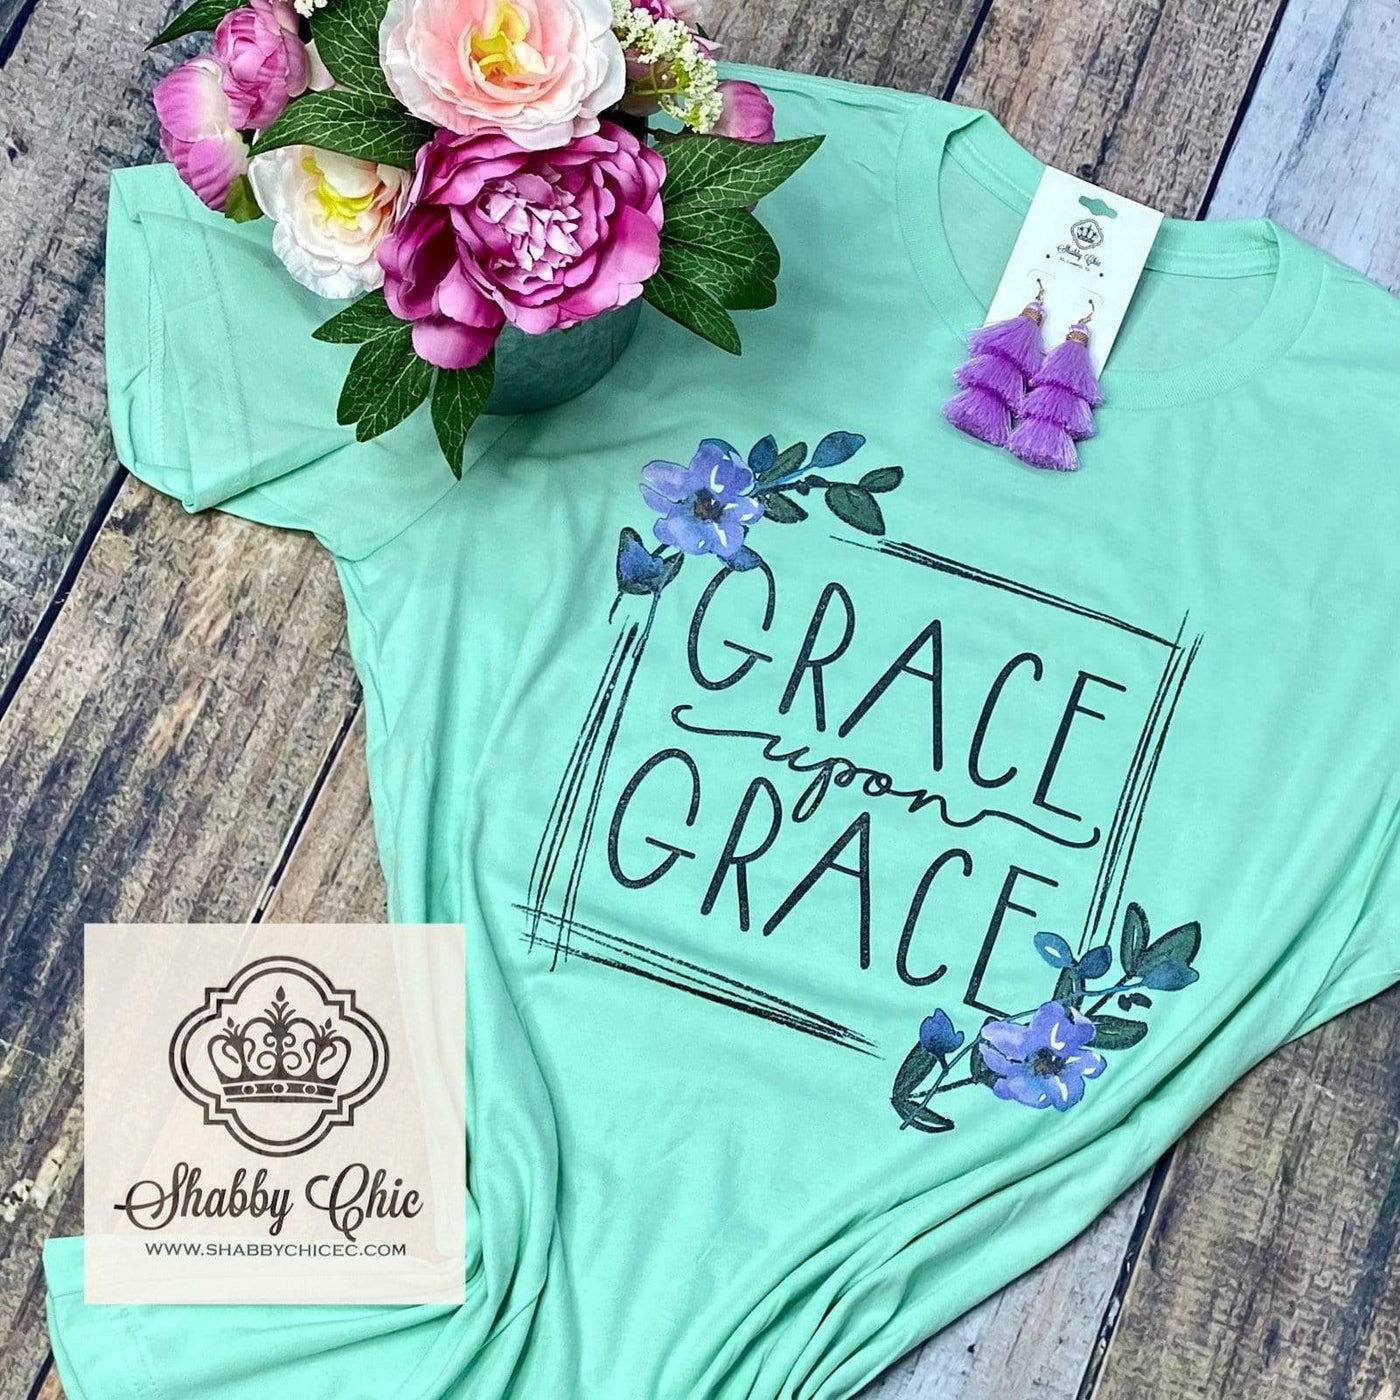 Grace upon Grace Shabby Chic Boutique and Tanning Salon